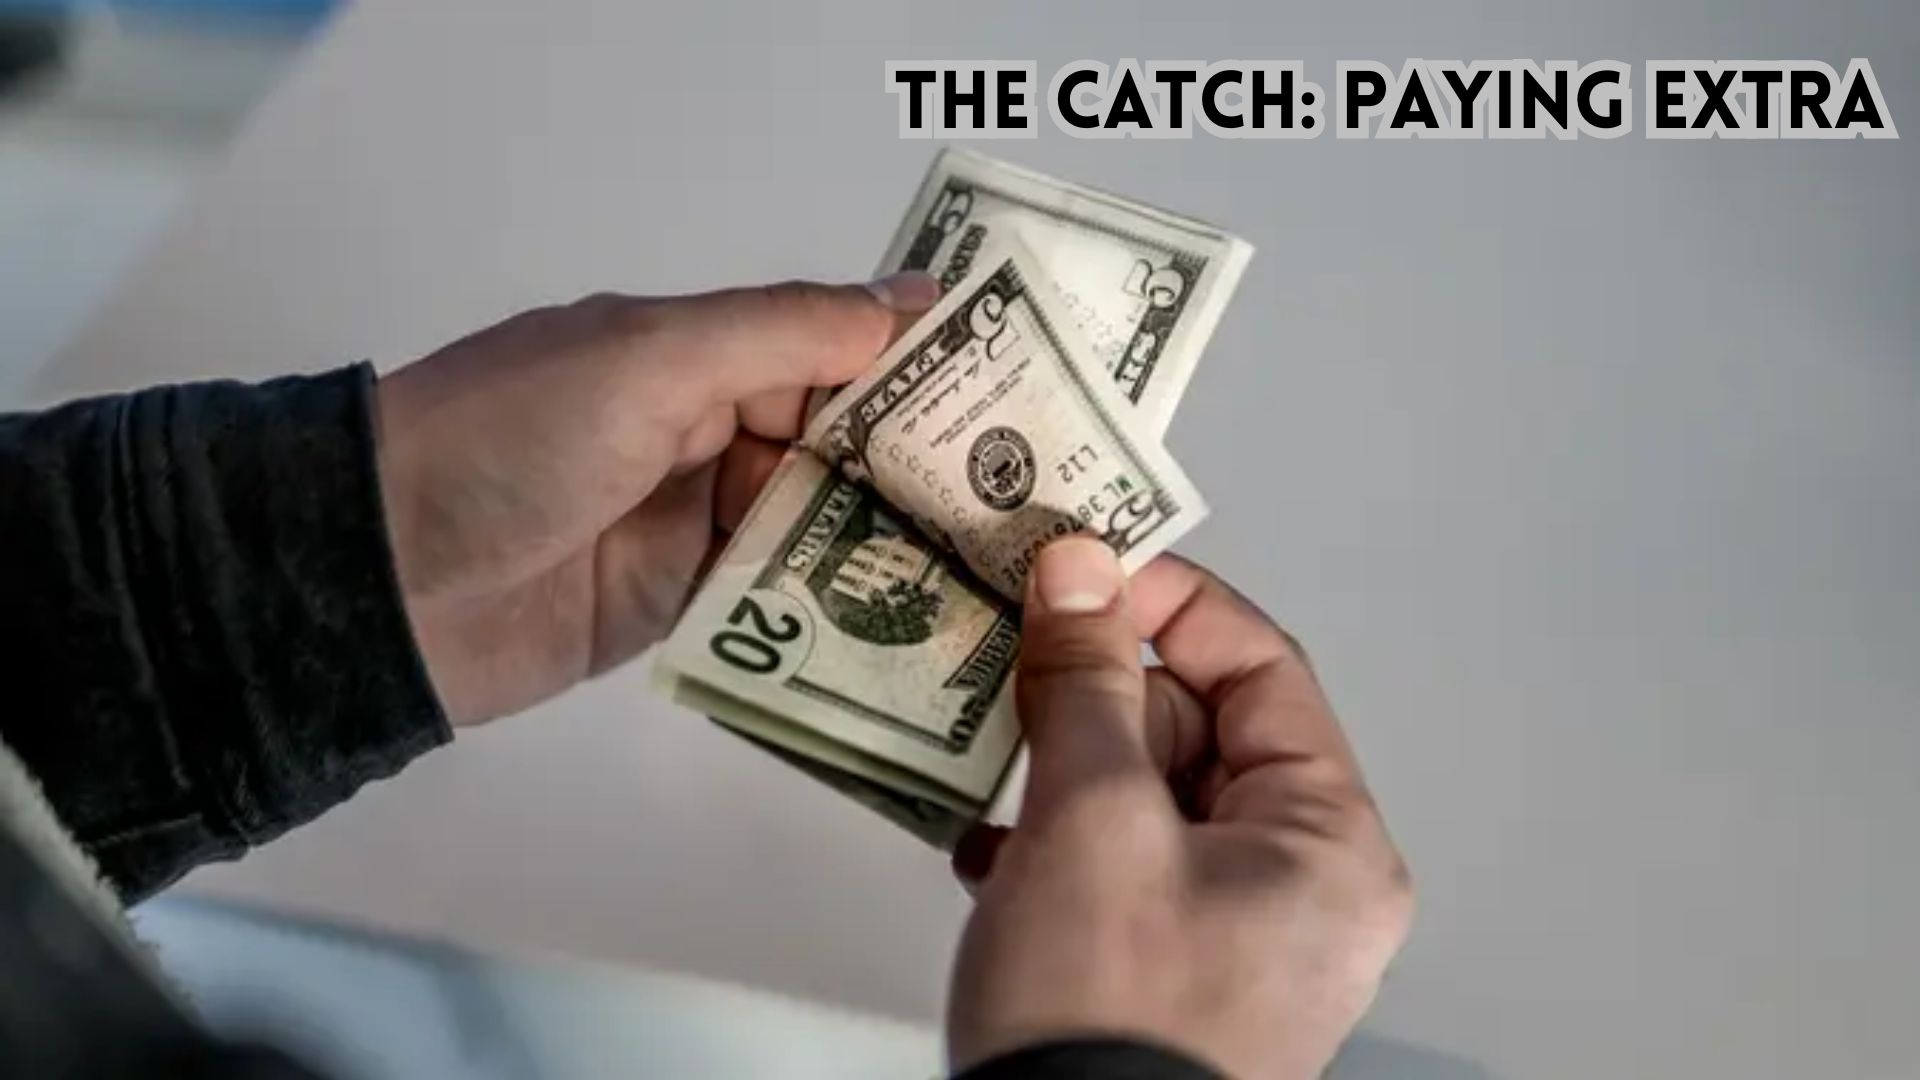 The Catch Paying Extra.